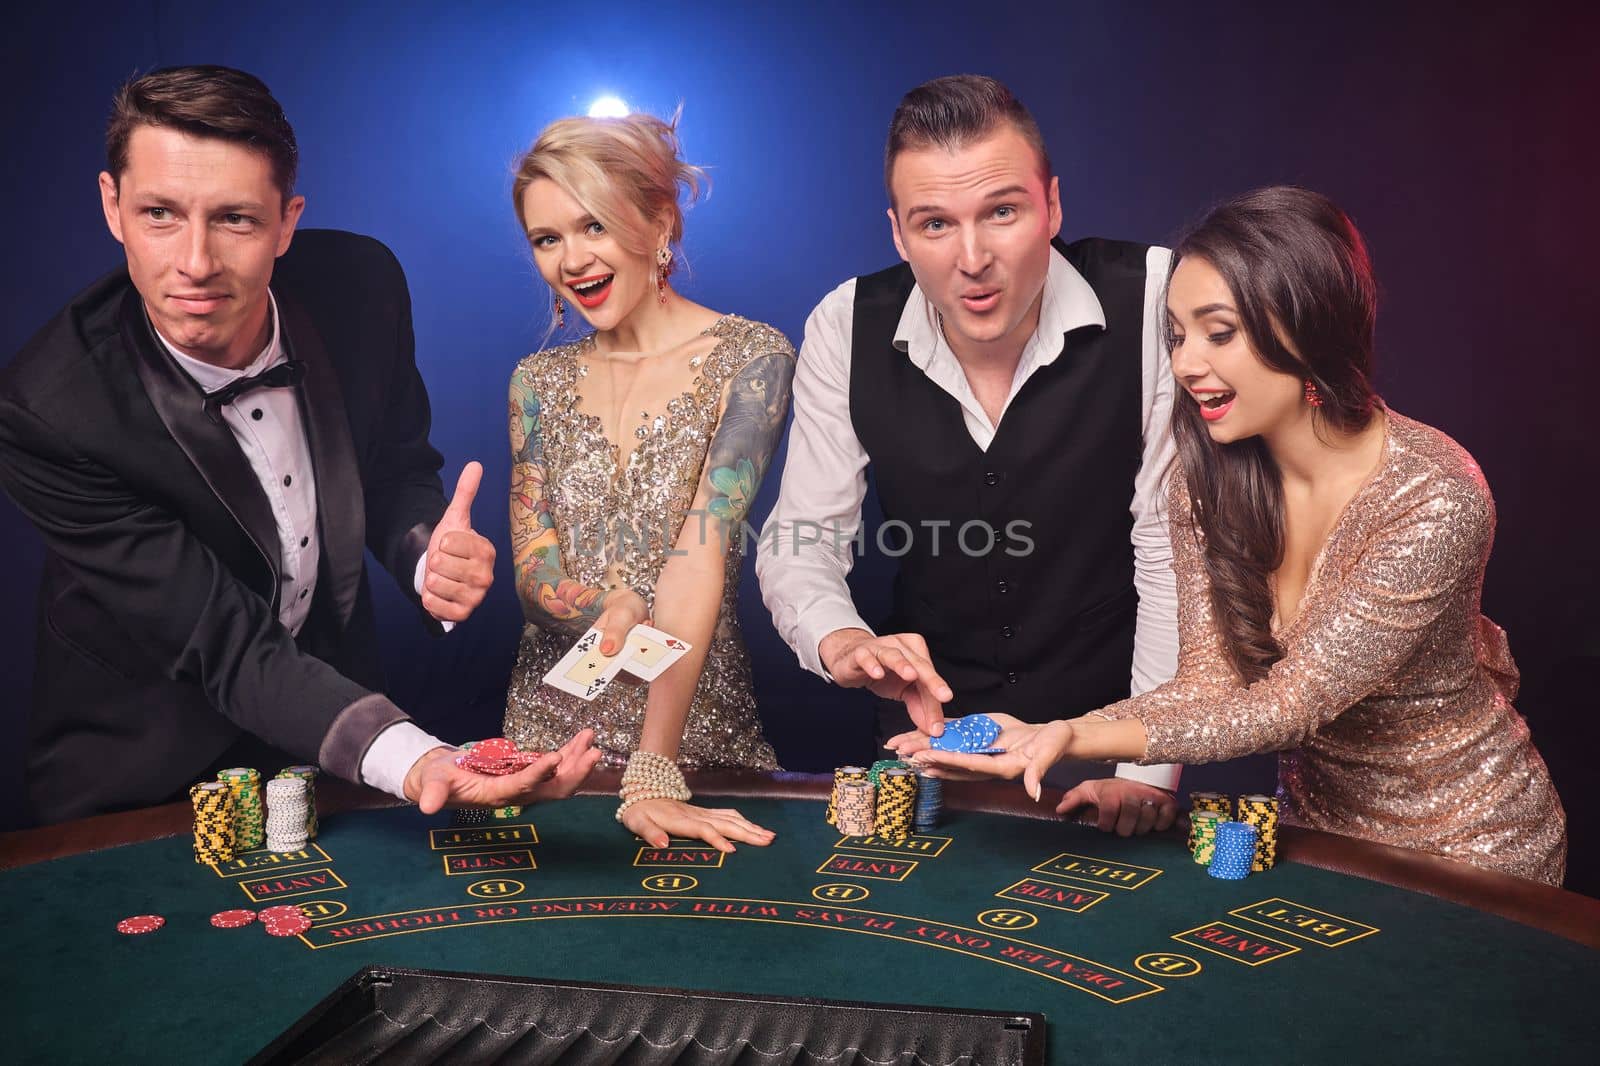 Group of a cheerful rich friends are playing poker at casino. Youth are making bets waiting for a big win. They are standing at the table against a red and blue backlights on black background. Risky gambling entertainment.